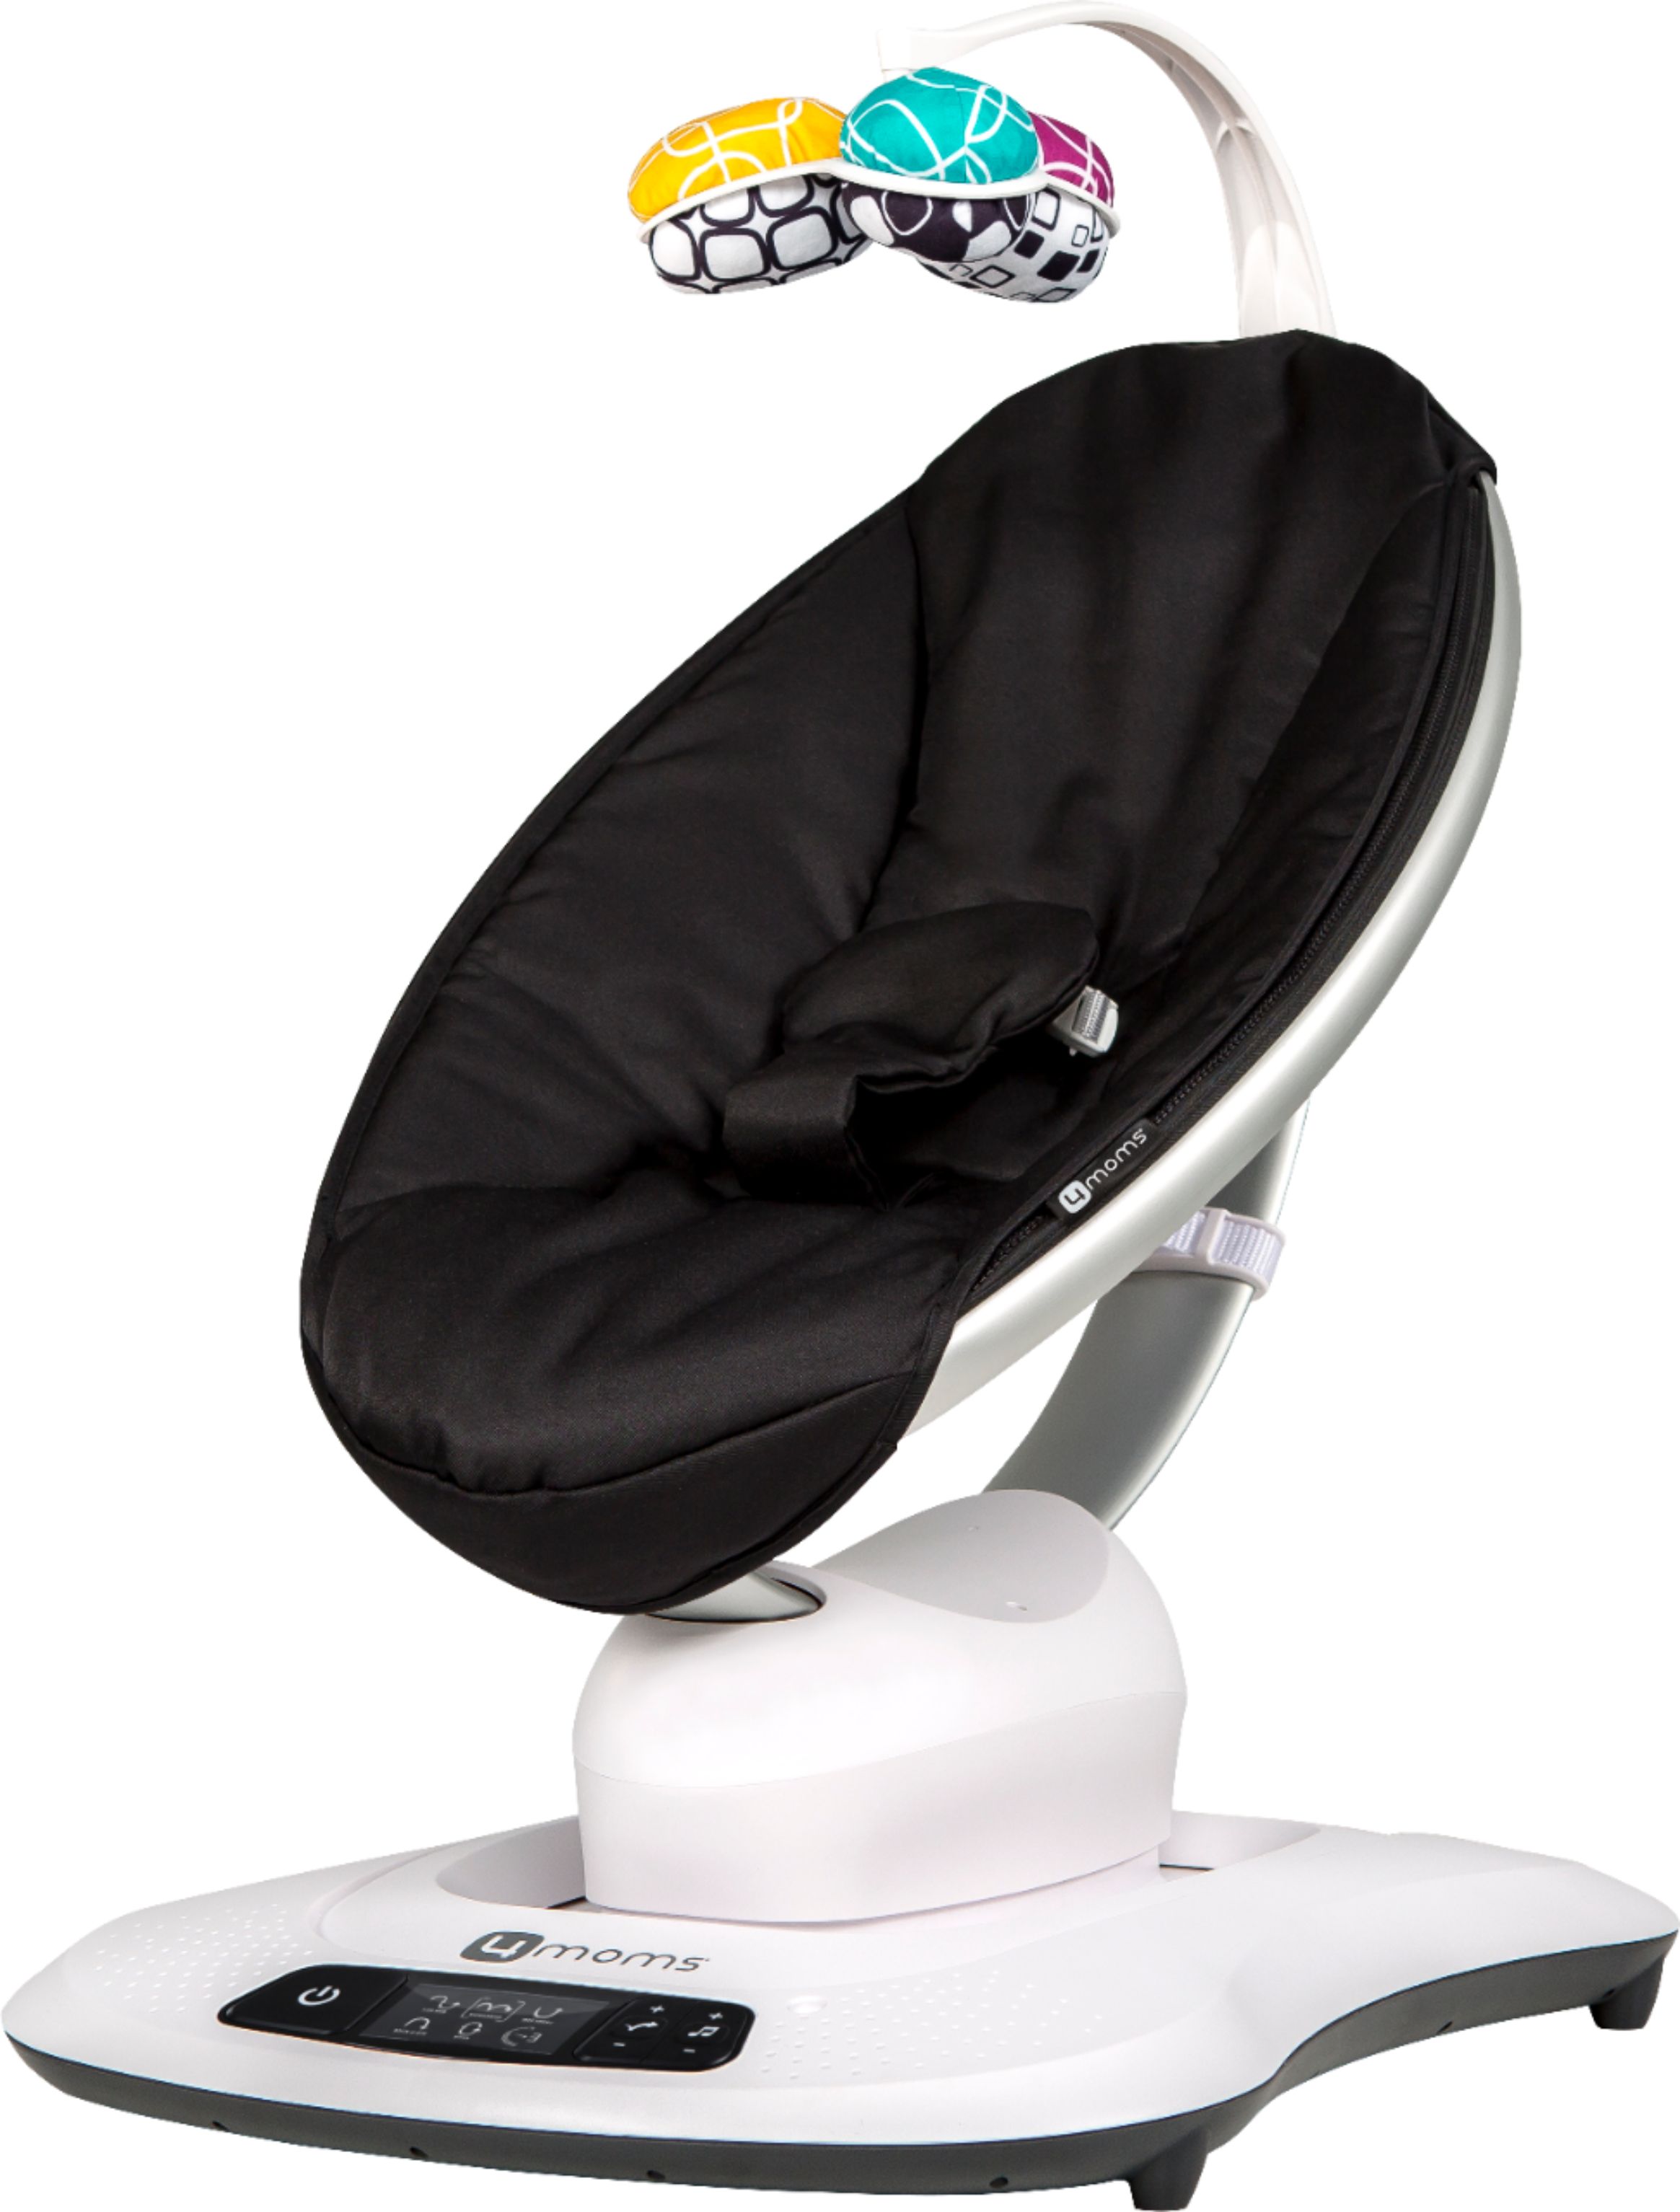 Left View: 4moms mamaRoo 4 Baby Swing, Bluetooth Baby Rocker with 5 Unique Motions, Smooth, Nylon Fabric, Classic Black, Unisex